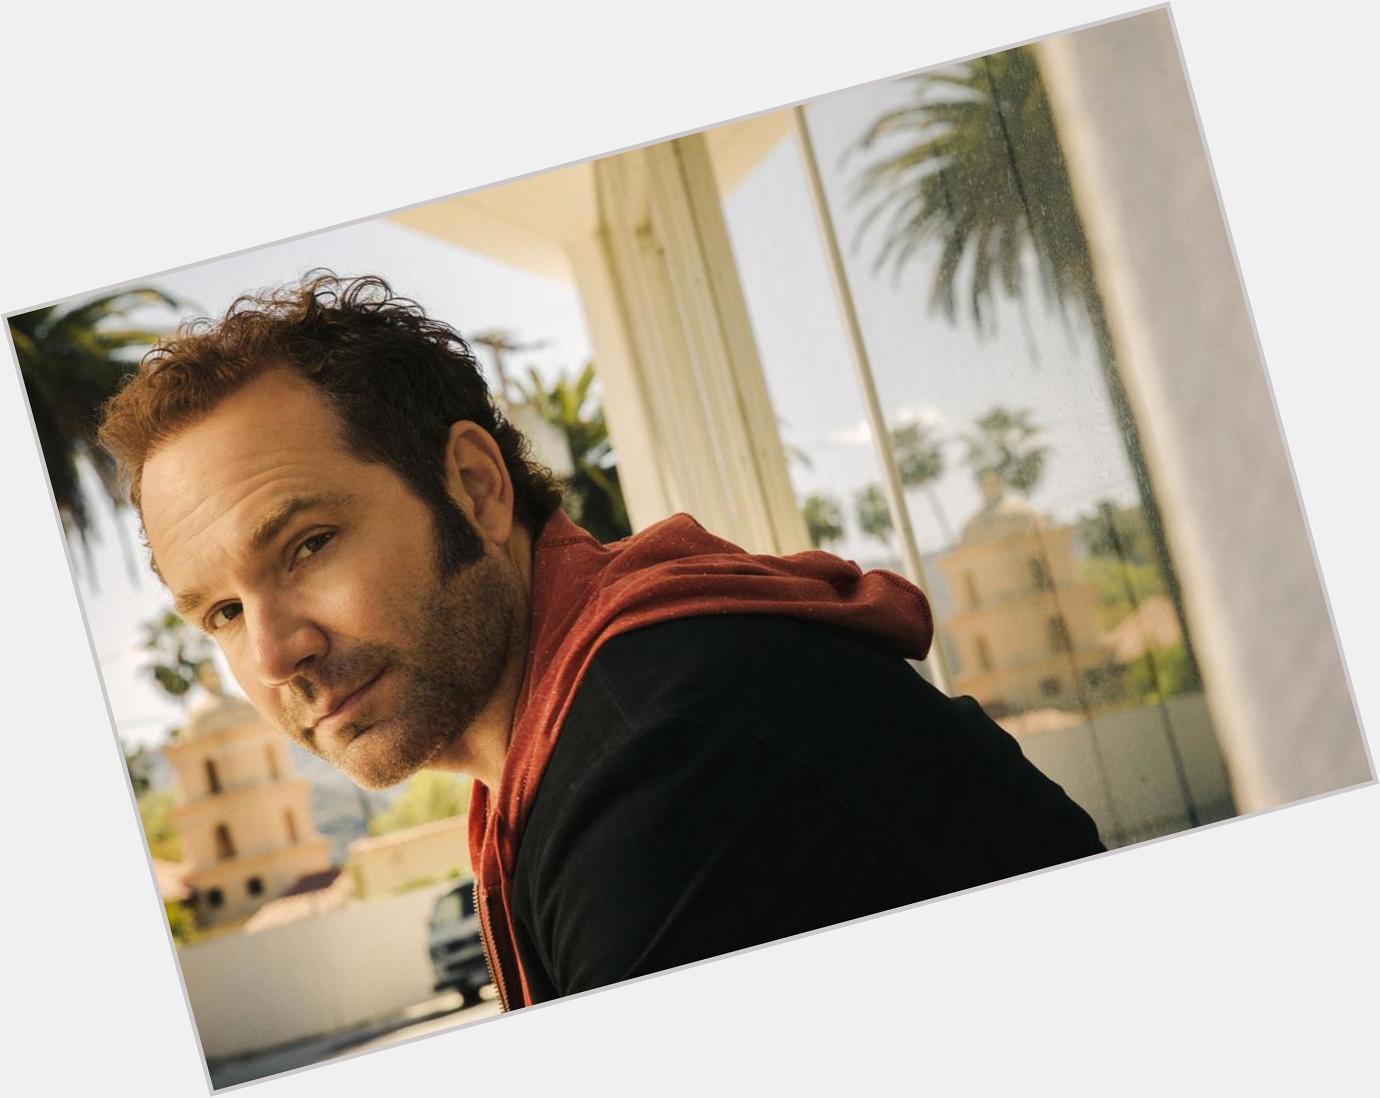 Please join me here at in wishing the one and only John Ondrasik a very Happy 56th Birthday today  